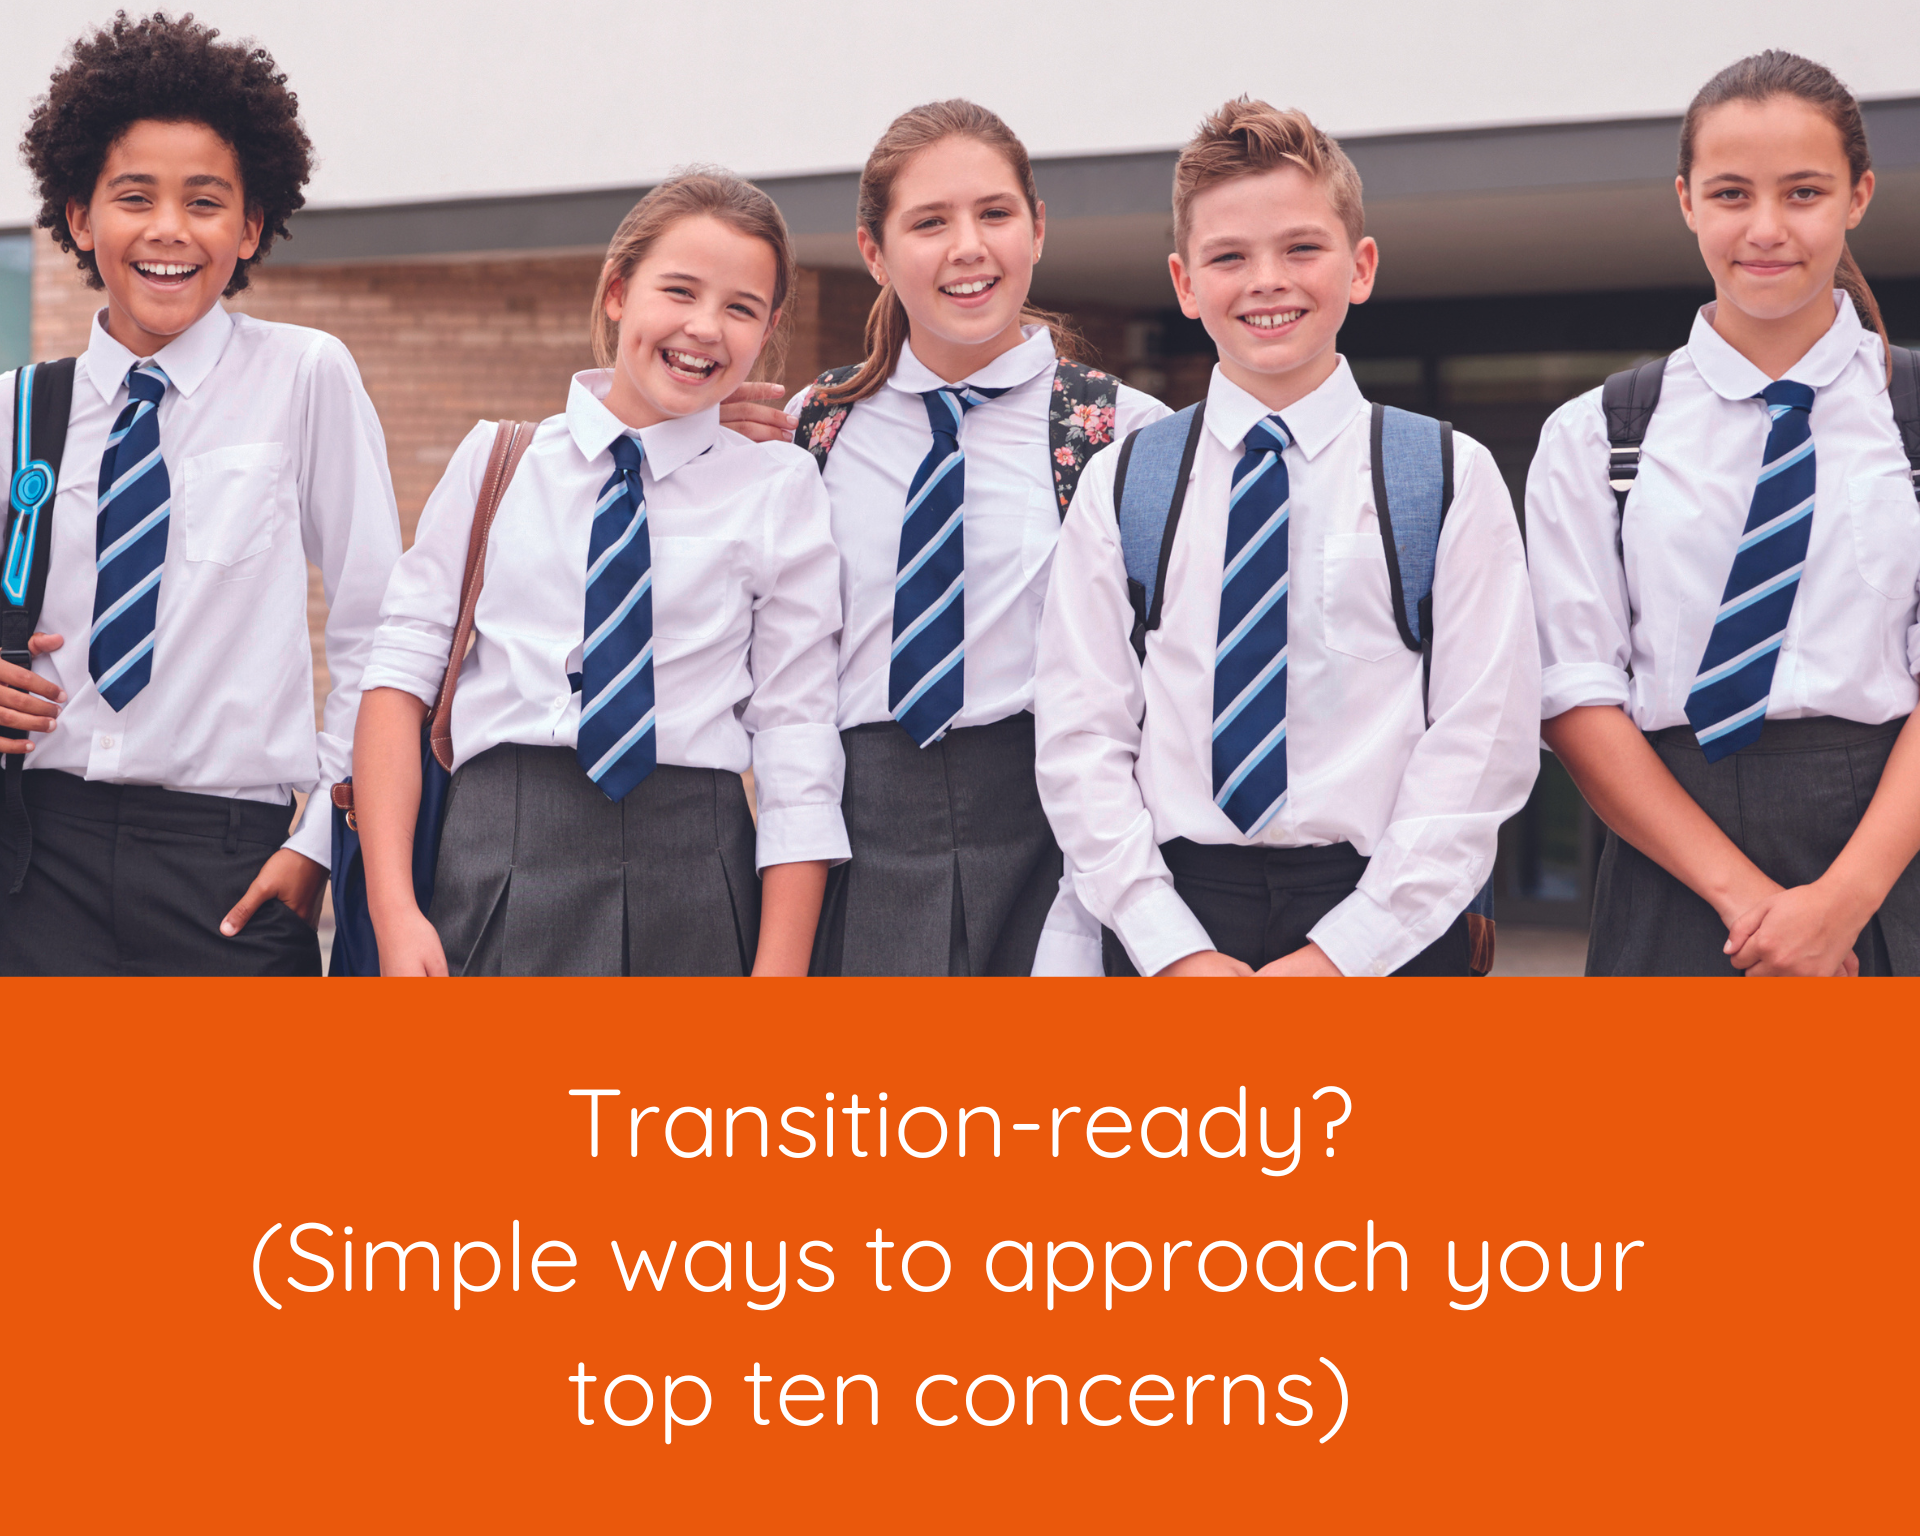 Transition-ready: Simple ways to approach your top ten concerns